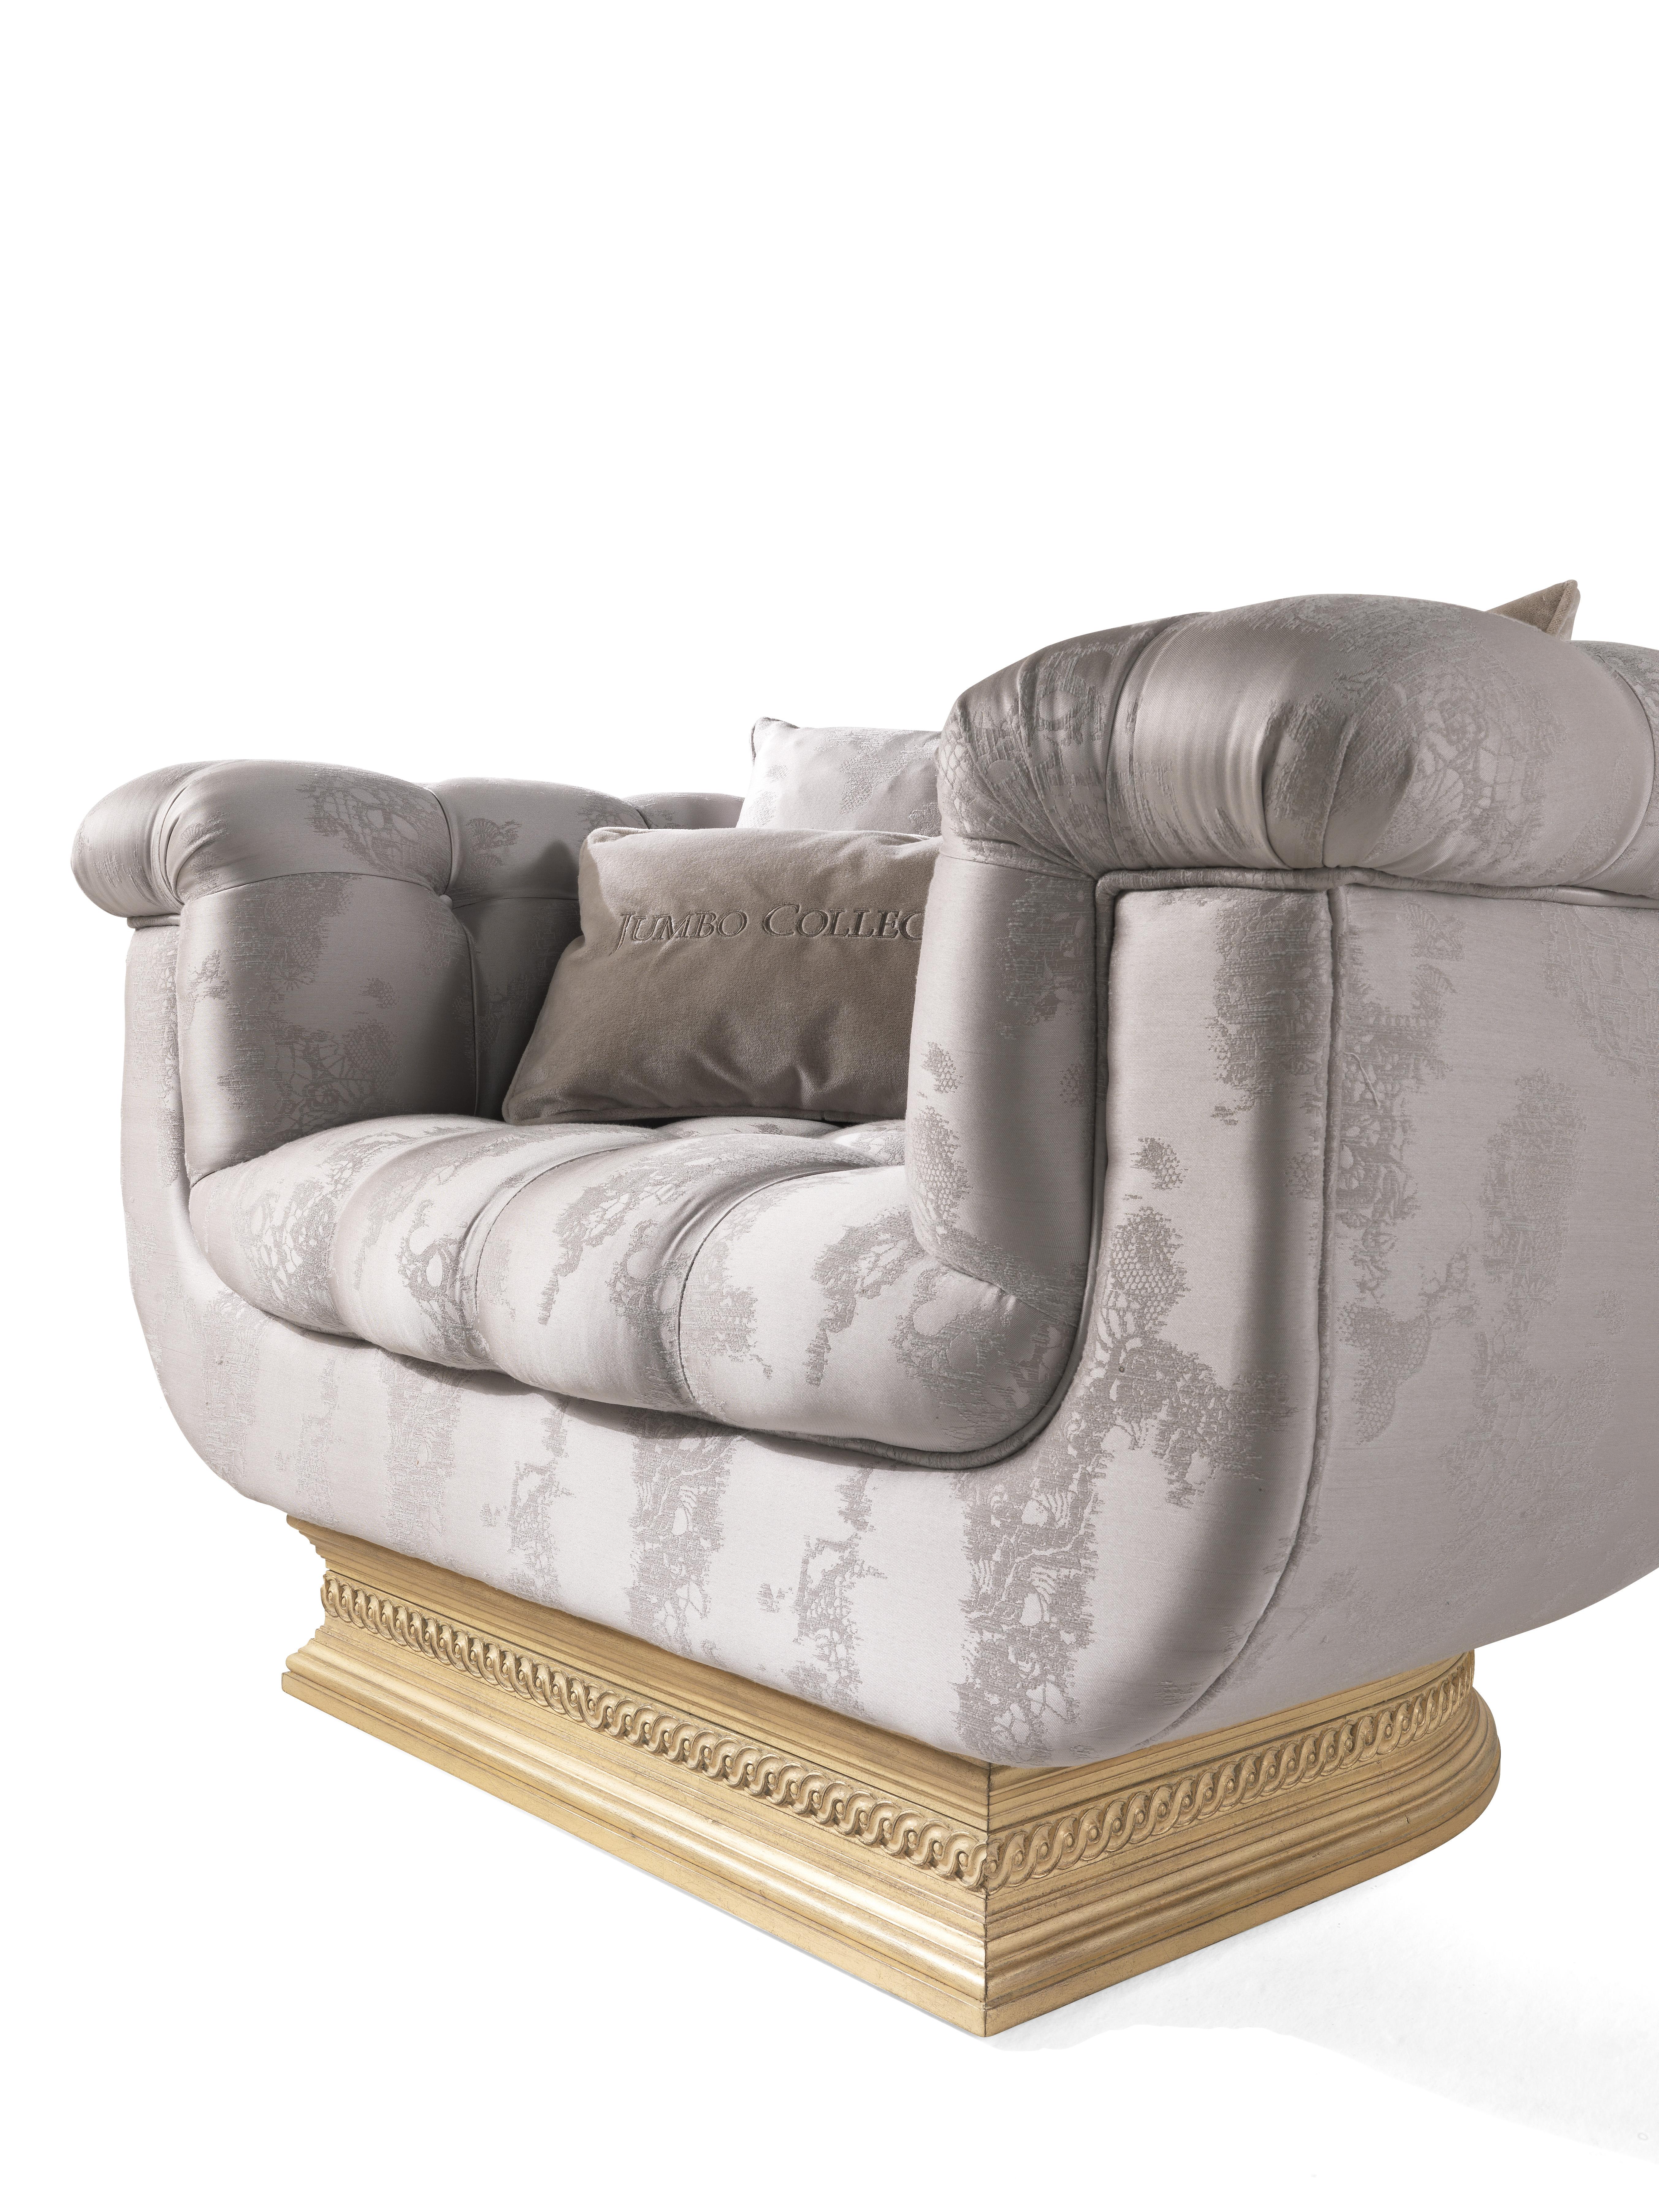 Louis XVI 21st Century Tulipe Armchair in Jacquard Fabric and Base in Hand-carved Wood For Sale